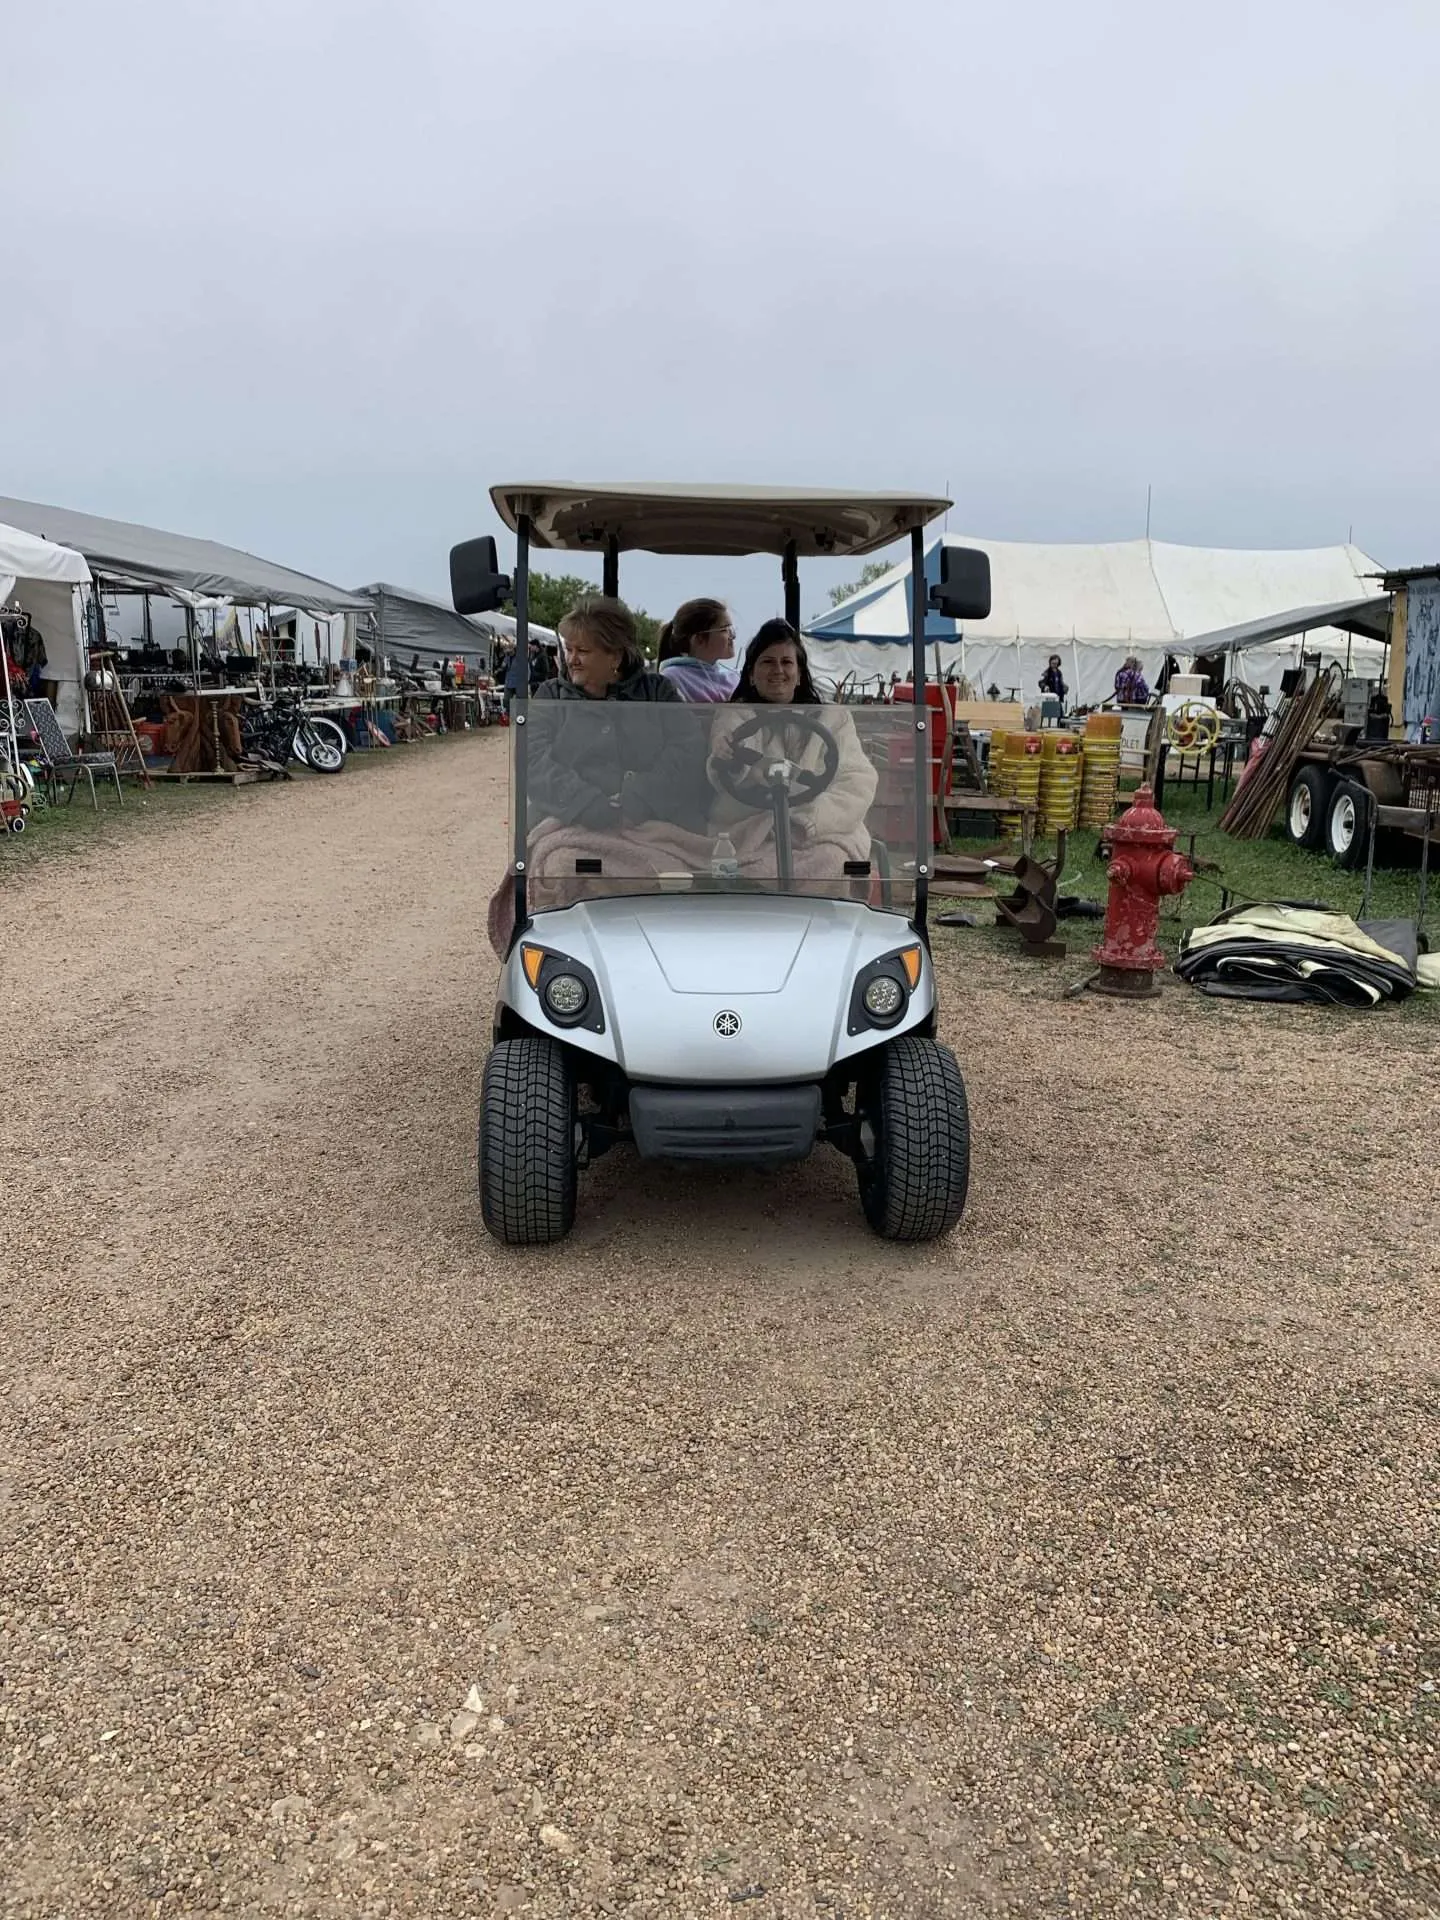 Renting a golf cart makes shopping the fields in Warrenton much easier.